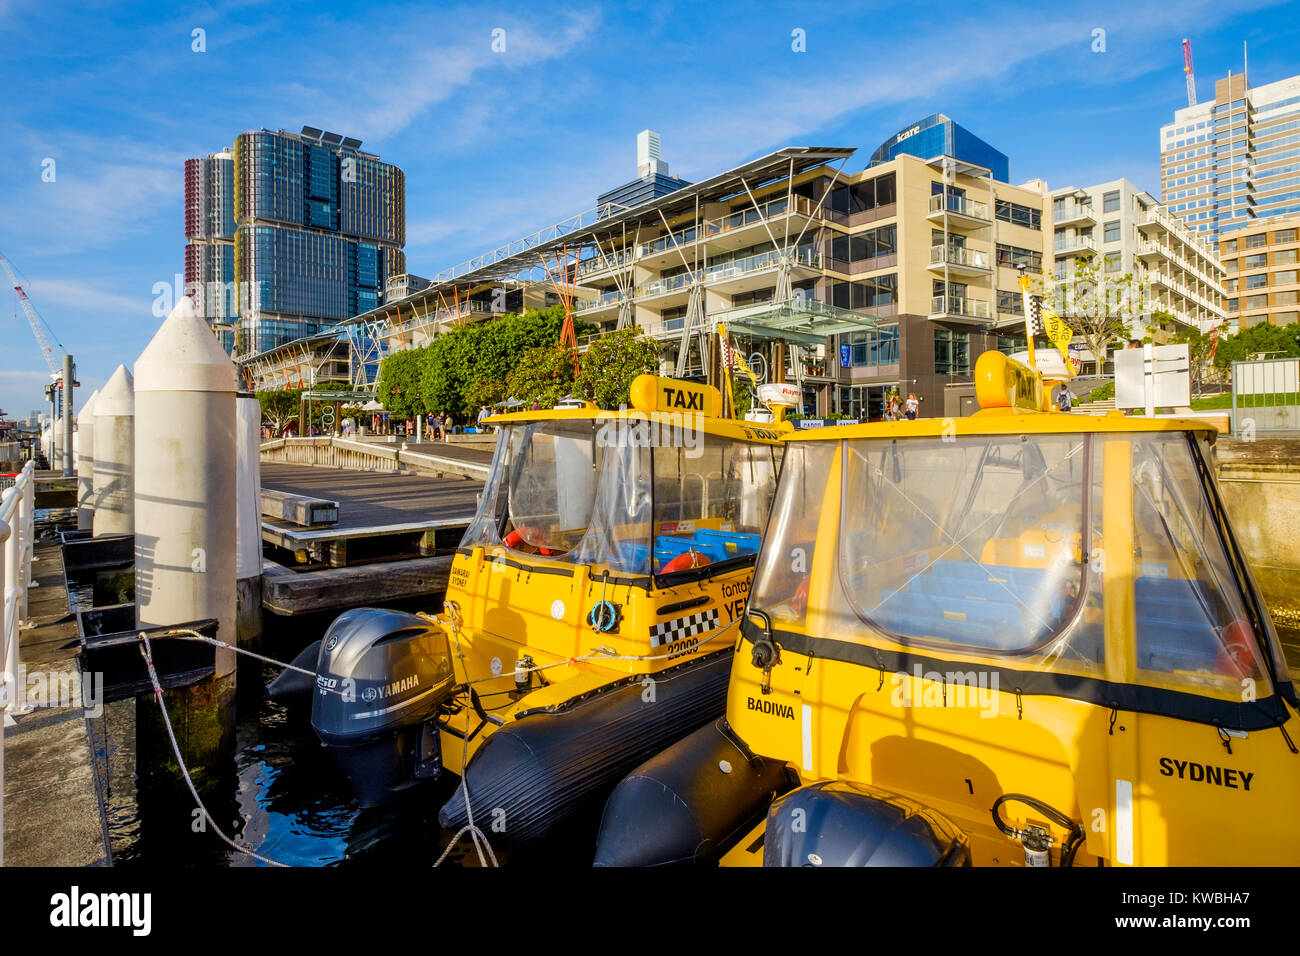 Yellow water taxi moored at Cockle Bay in Darling Harbour (Harbor), Sydney, Australia Stock Photo